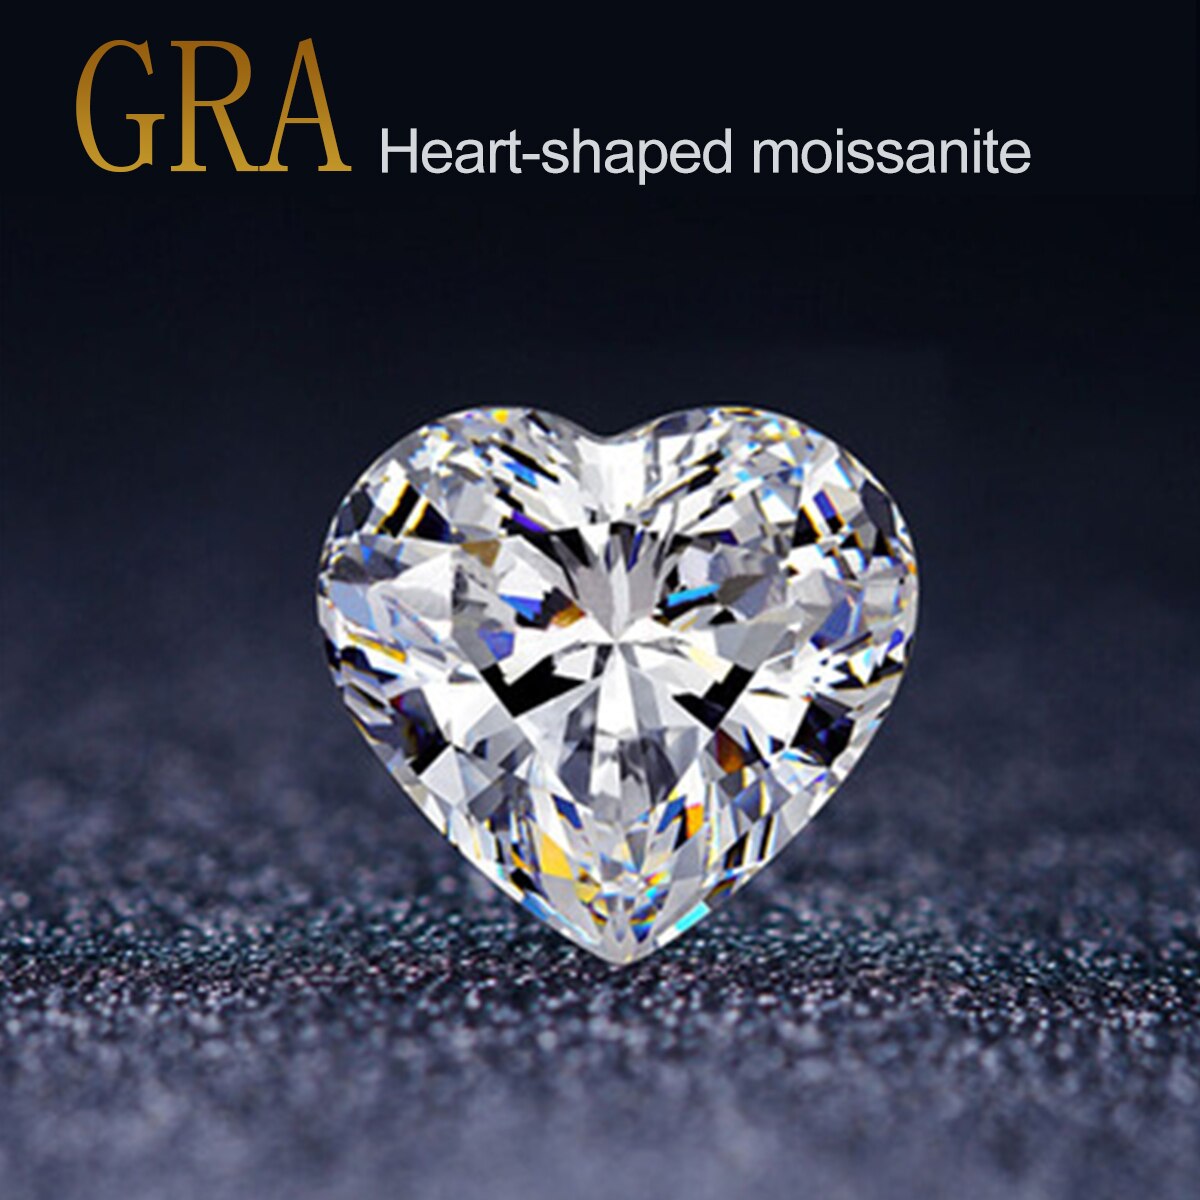 Szjinao 10pcs Real Loose Gesmtones Moissanite Stones 0.1ct 3mm D Color VVS1 Heart Shaped Diamond Undefined For Jewelry Material